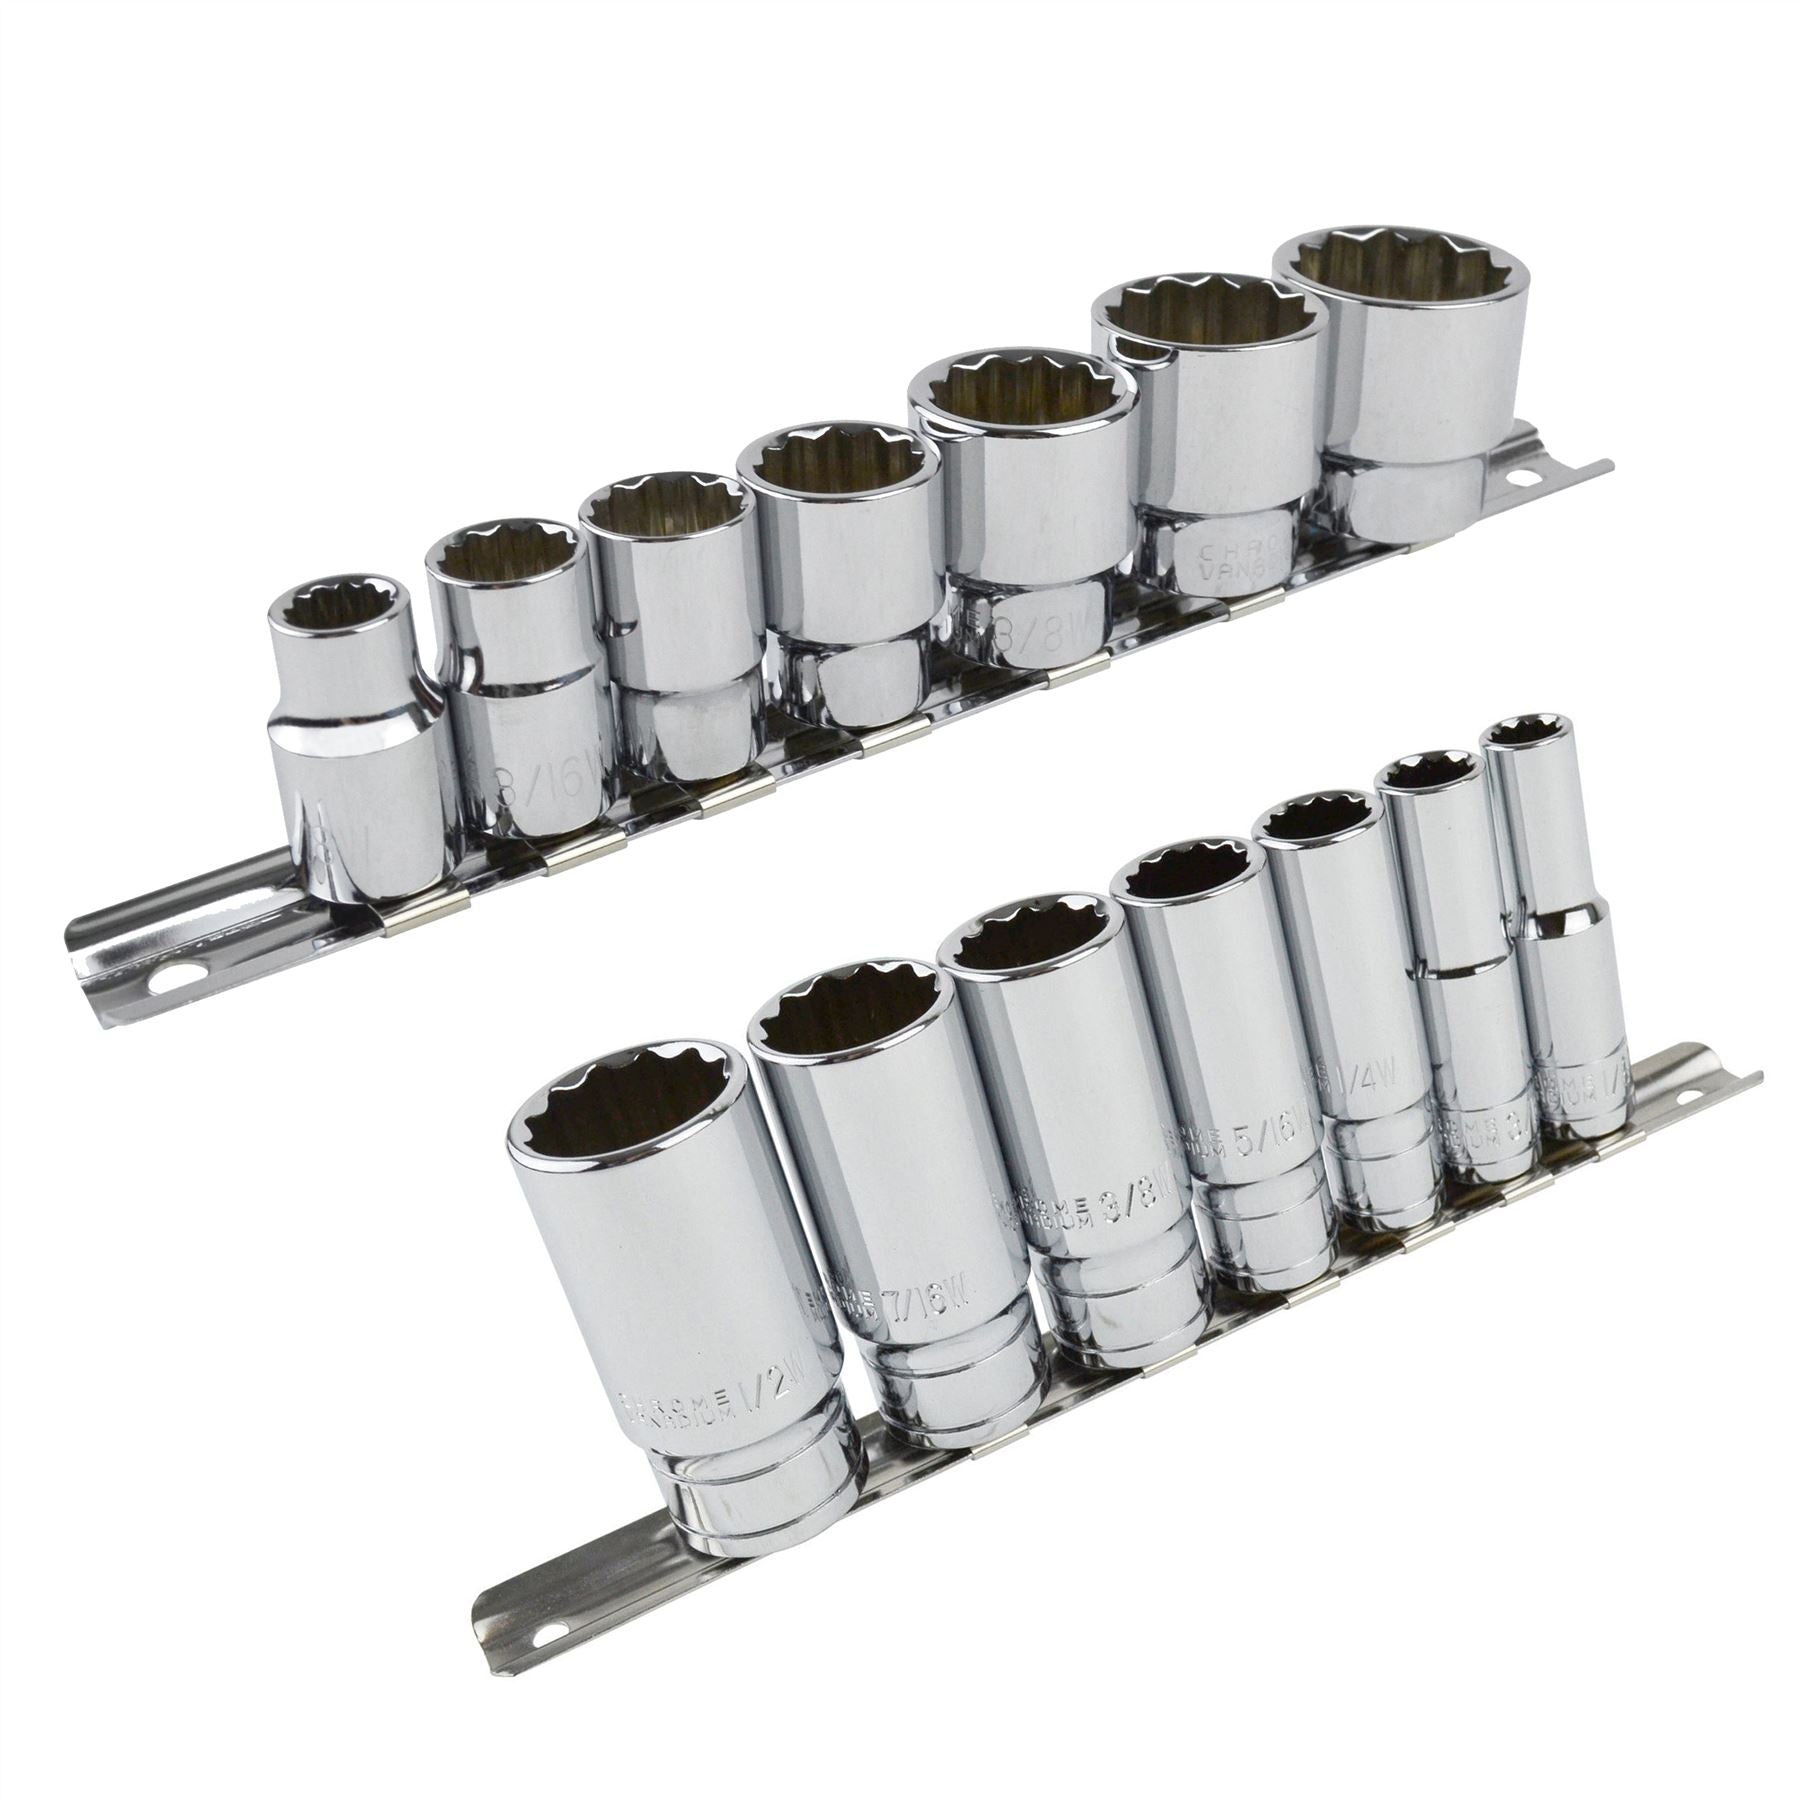 Whitworth BSF BSW 3/8" Drive Shallow And Deep Sockets 14pc 12 Sided Bi-Hex